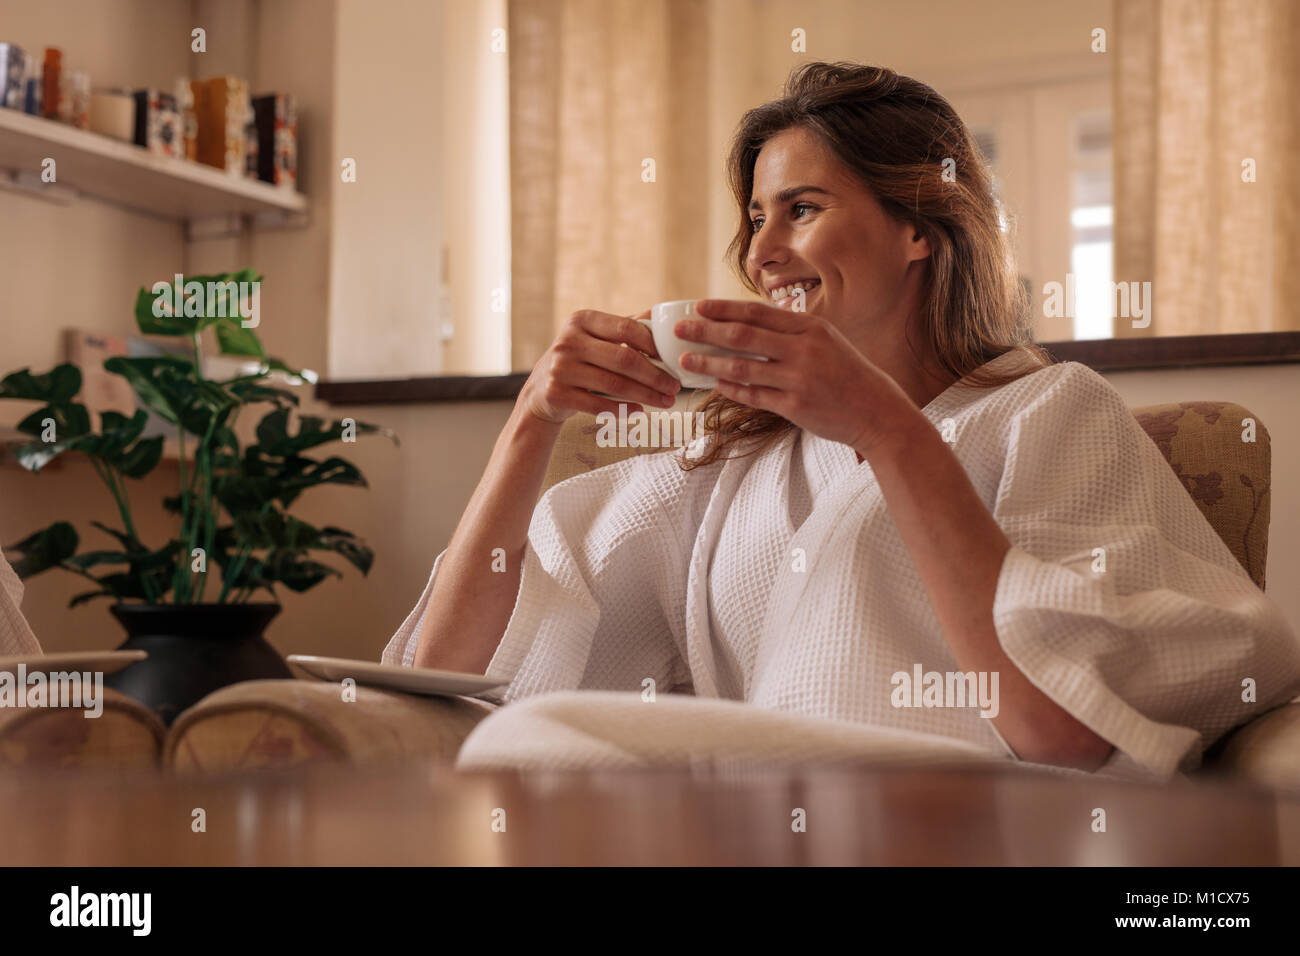 Smiling woman in bathrobe sitting on chair and drinking coffee at health spa. Female having coffee and relaxing at spa salon. Stock Photo